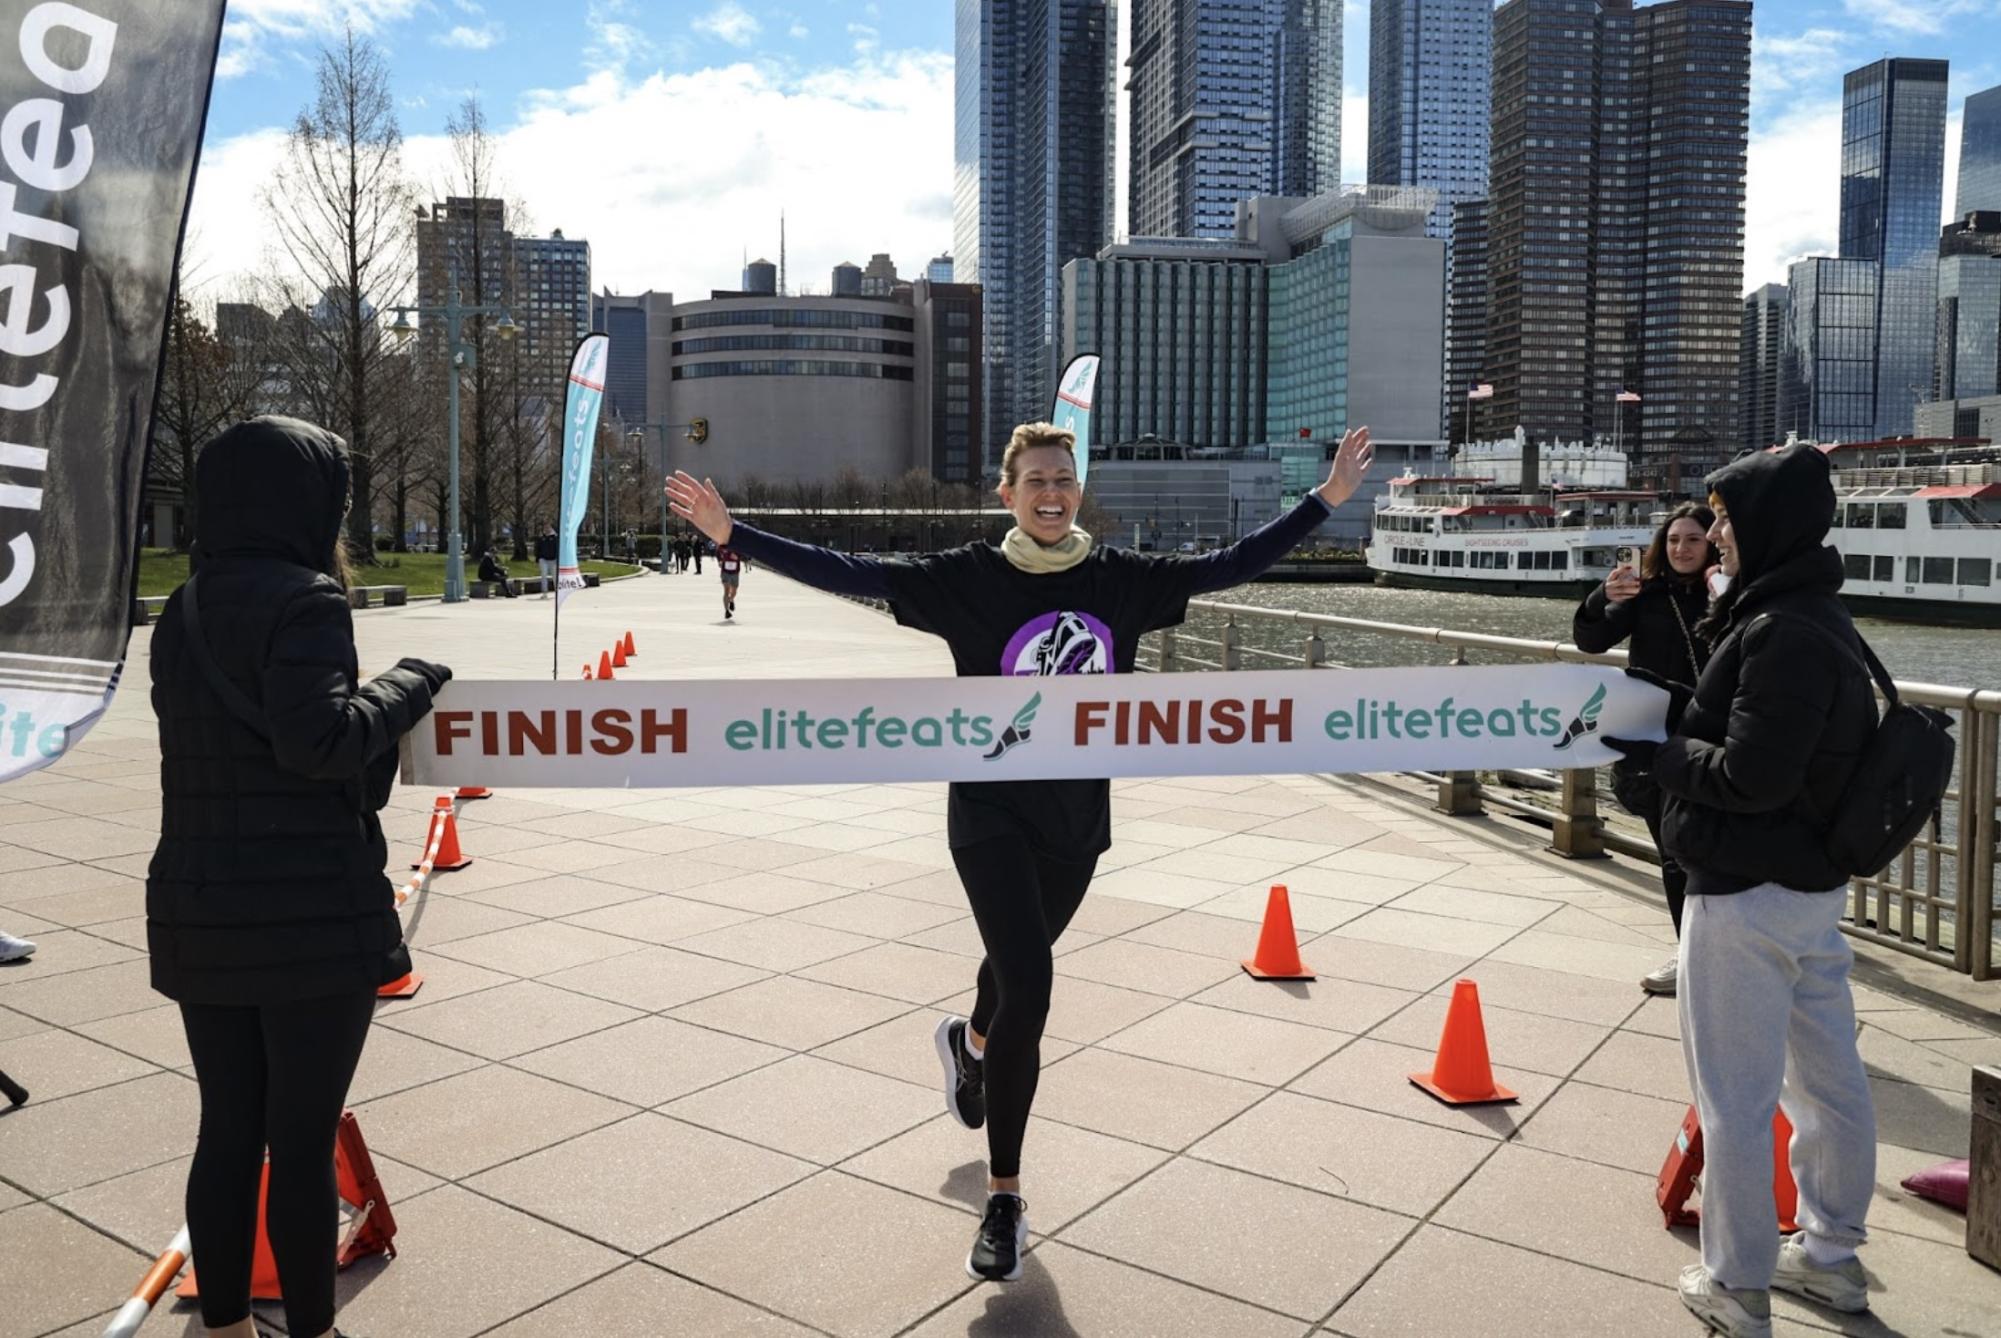 A woman raises her hands triumphantly as she crosses the finish line.